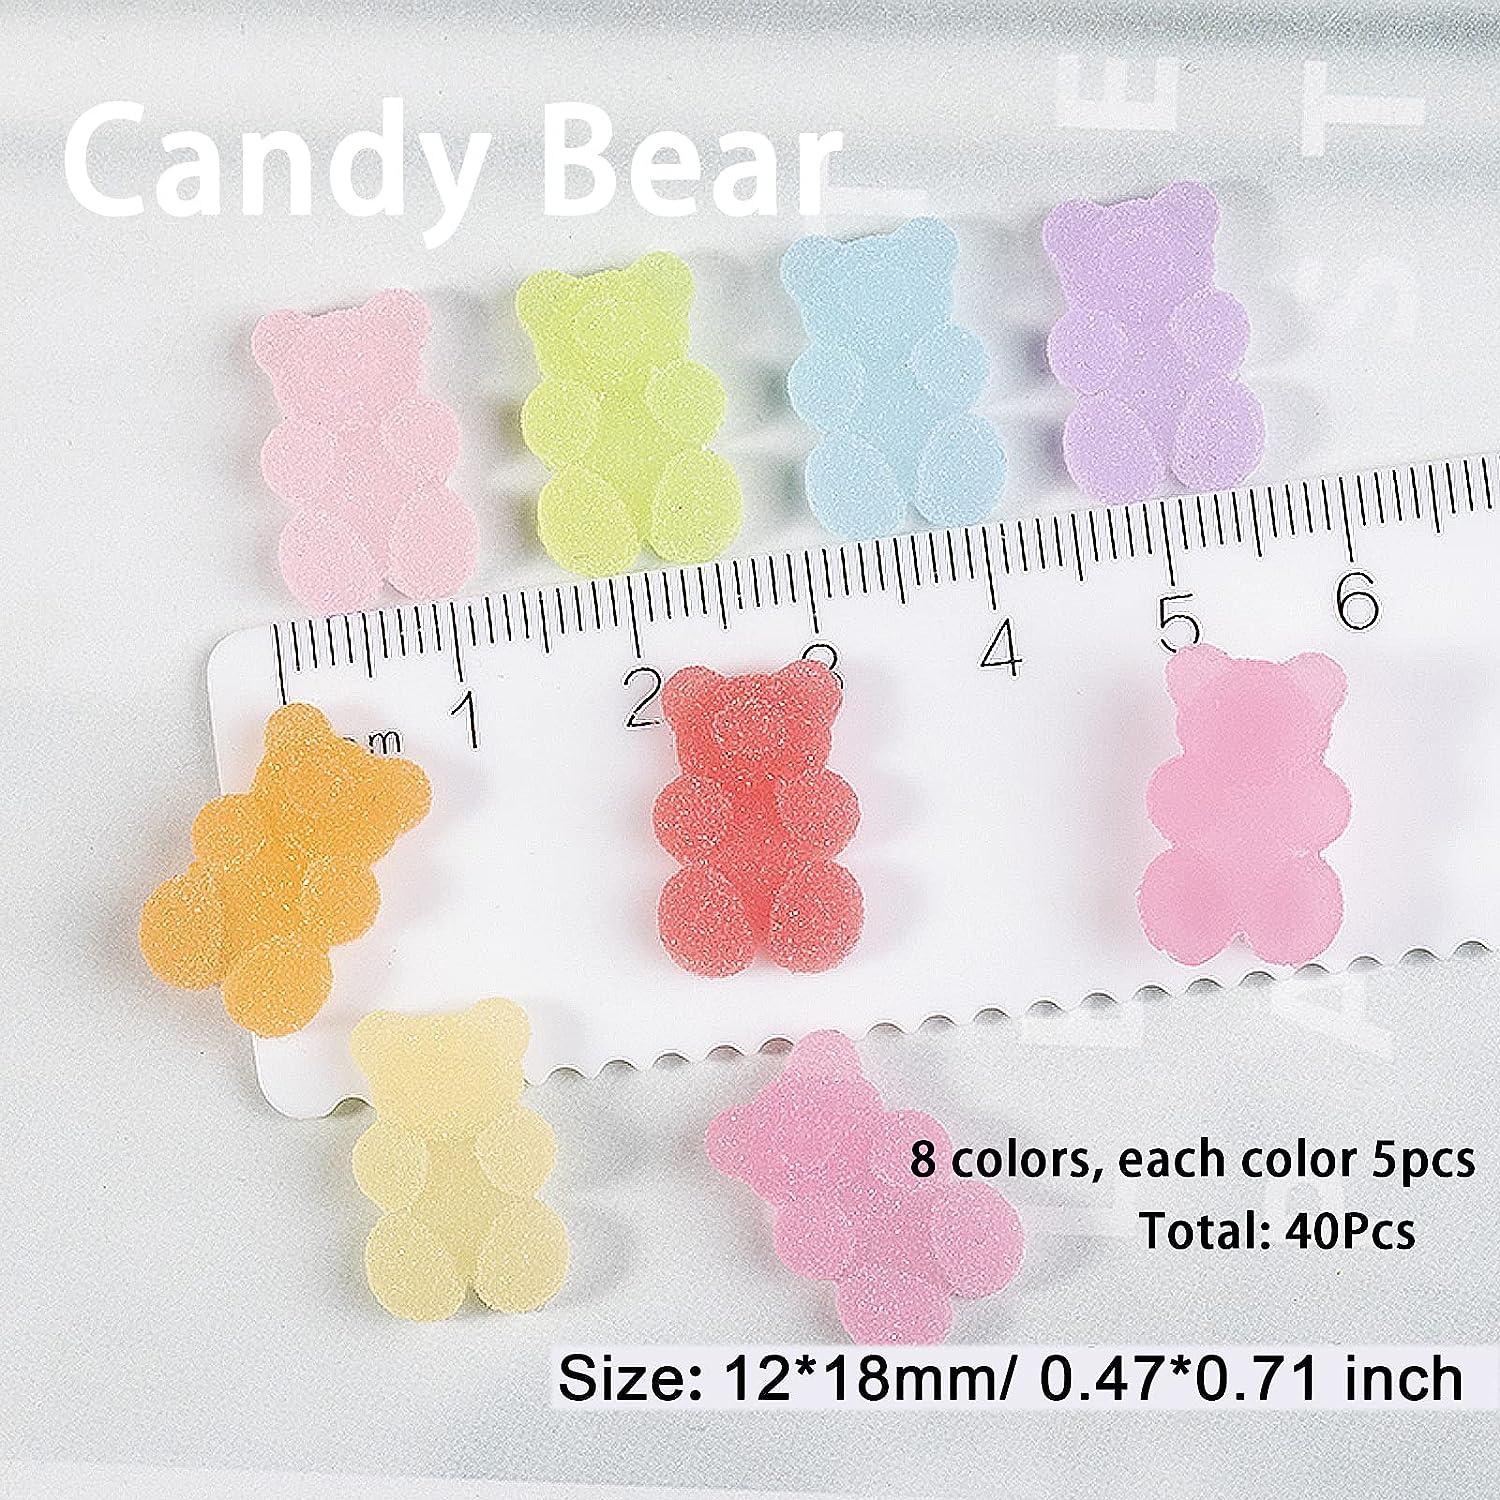 5Pcs 3D Candy Nail Charms Lollipop Colorful Resin Acrylic for nail Art DIY